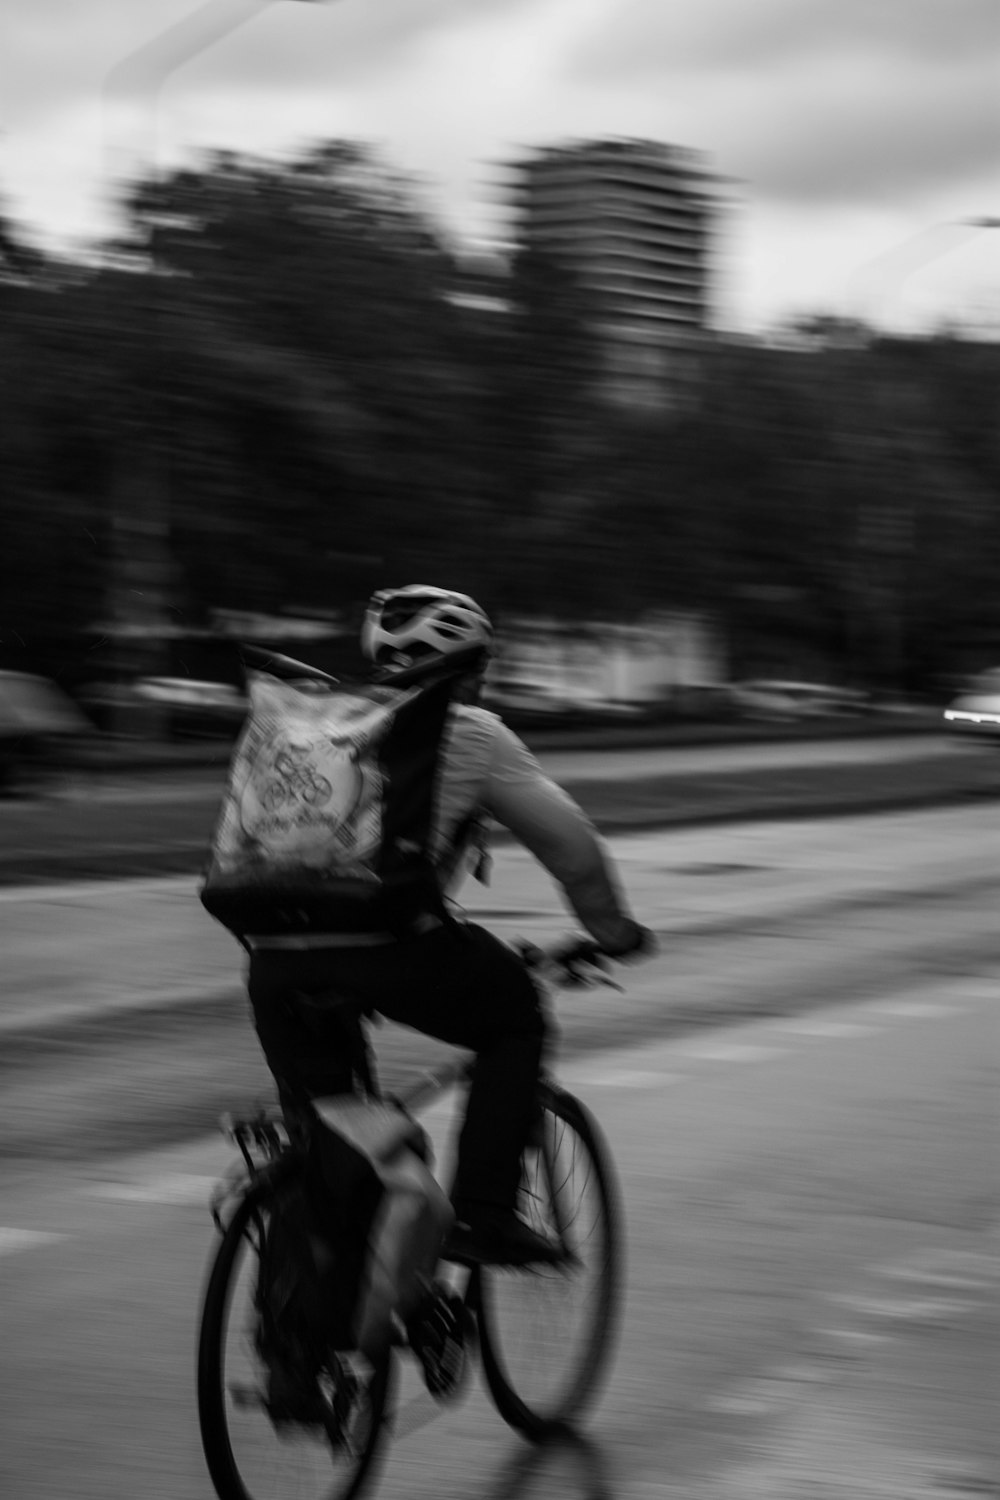 grayscale photo of man riding bicycle